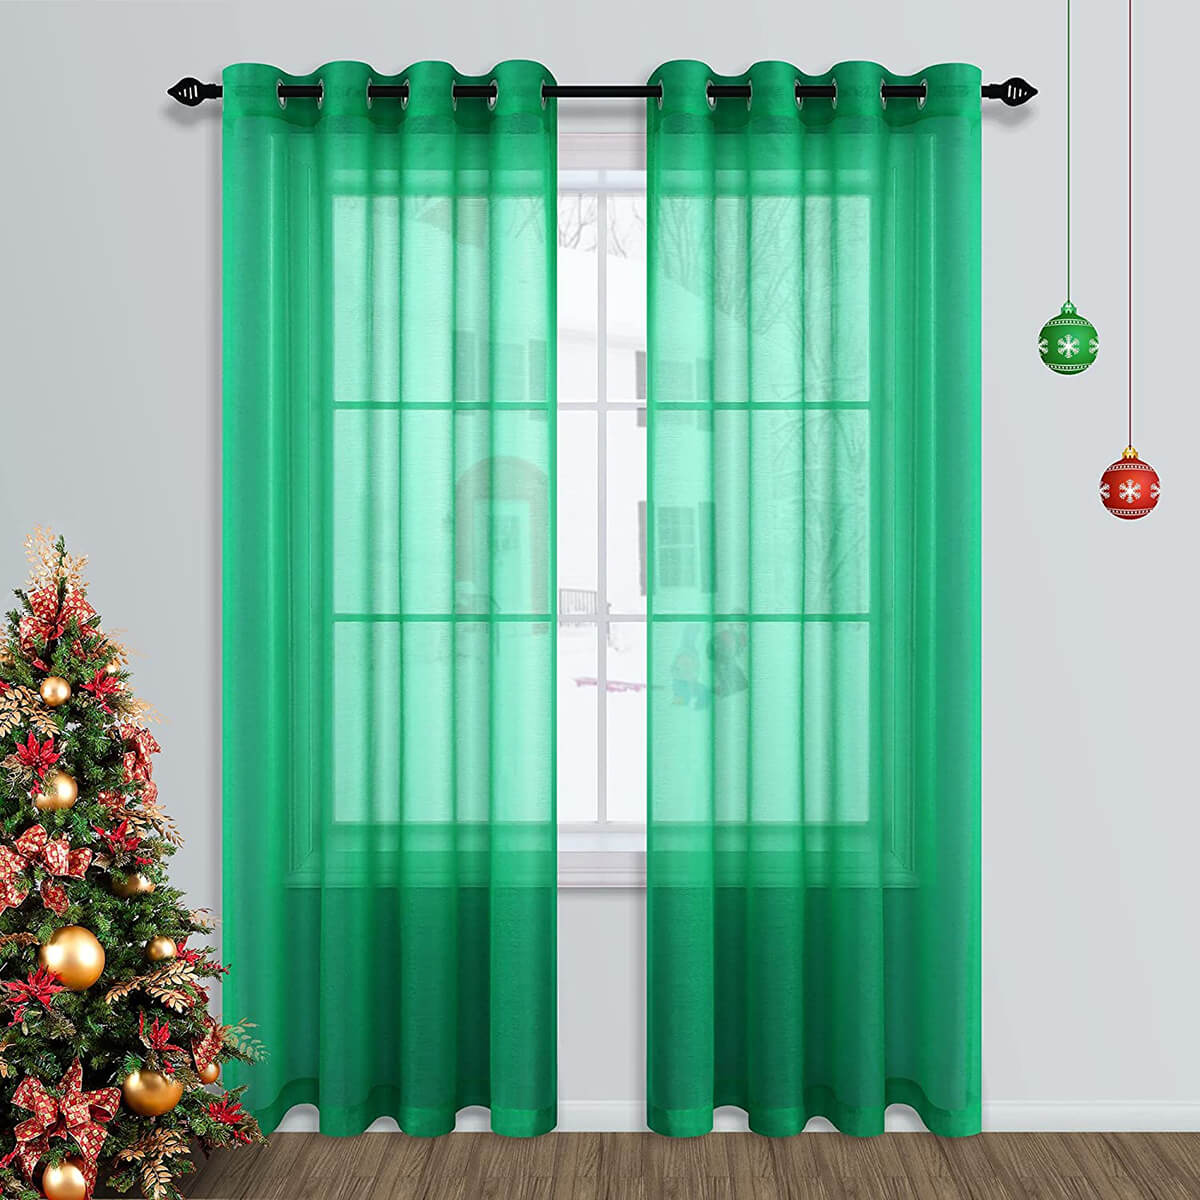 Channel Christmas Cheer with Gossamer Green Curtains